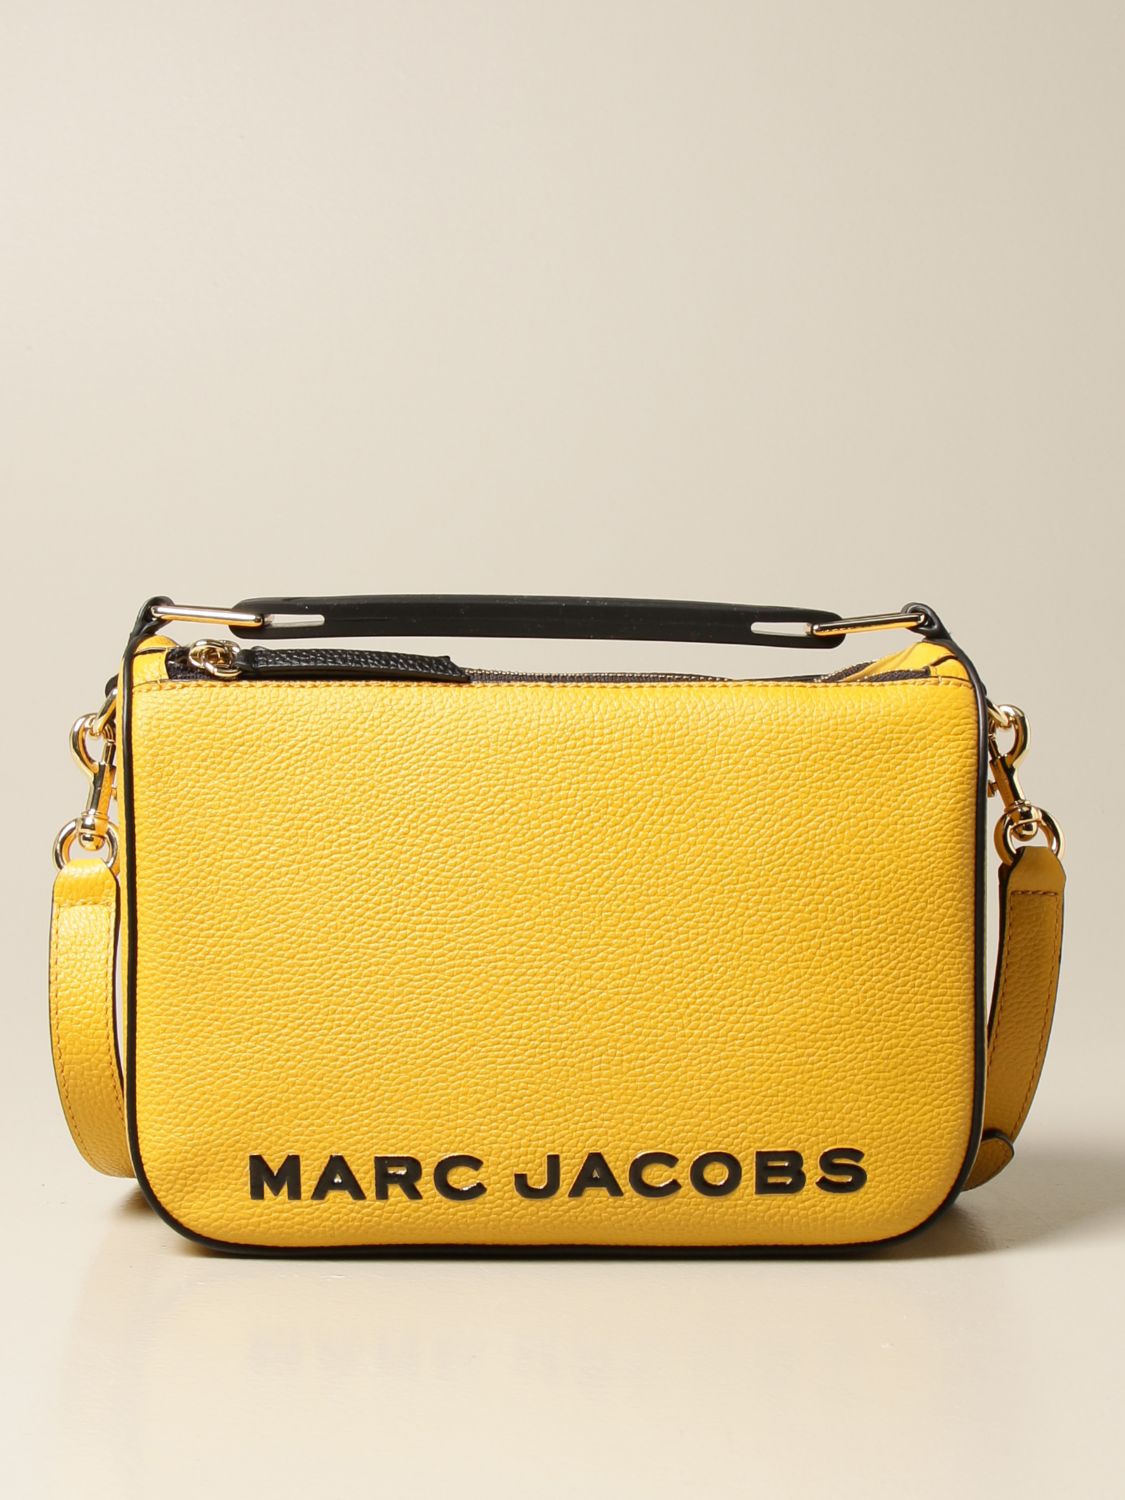 The Colorblock Softbox Marc Jacobs bag in textured leather